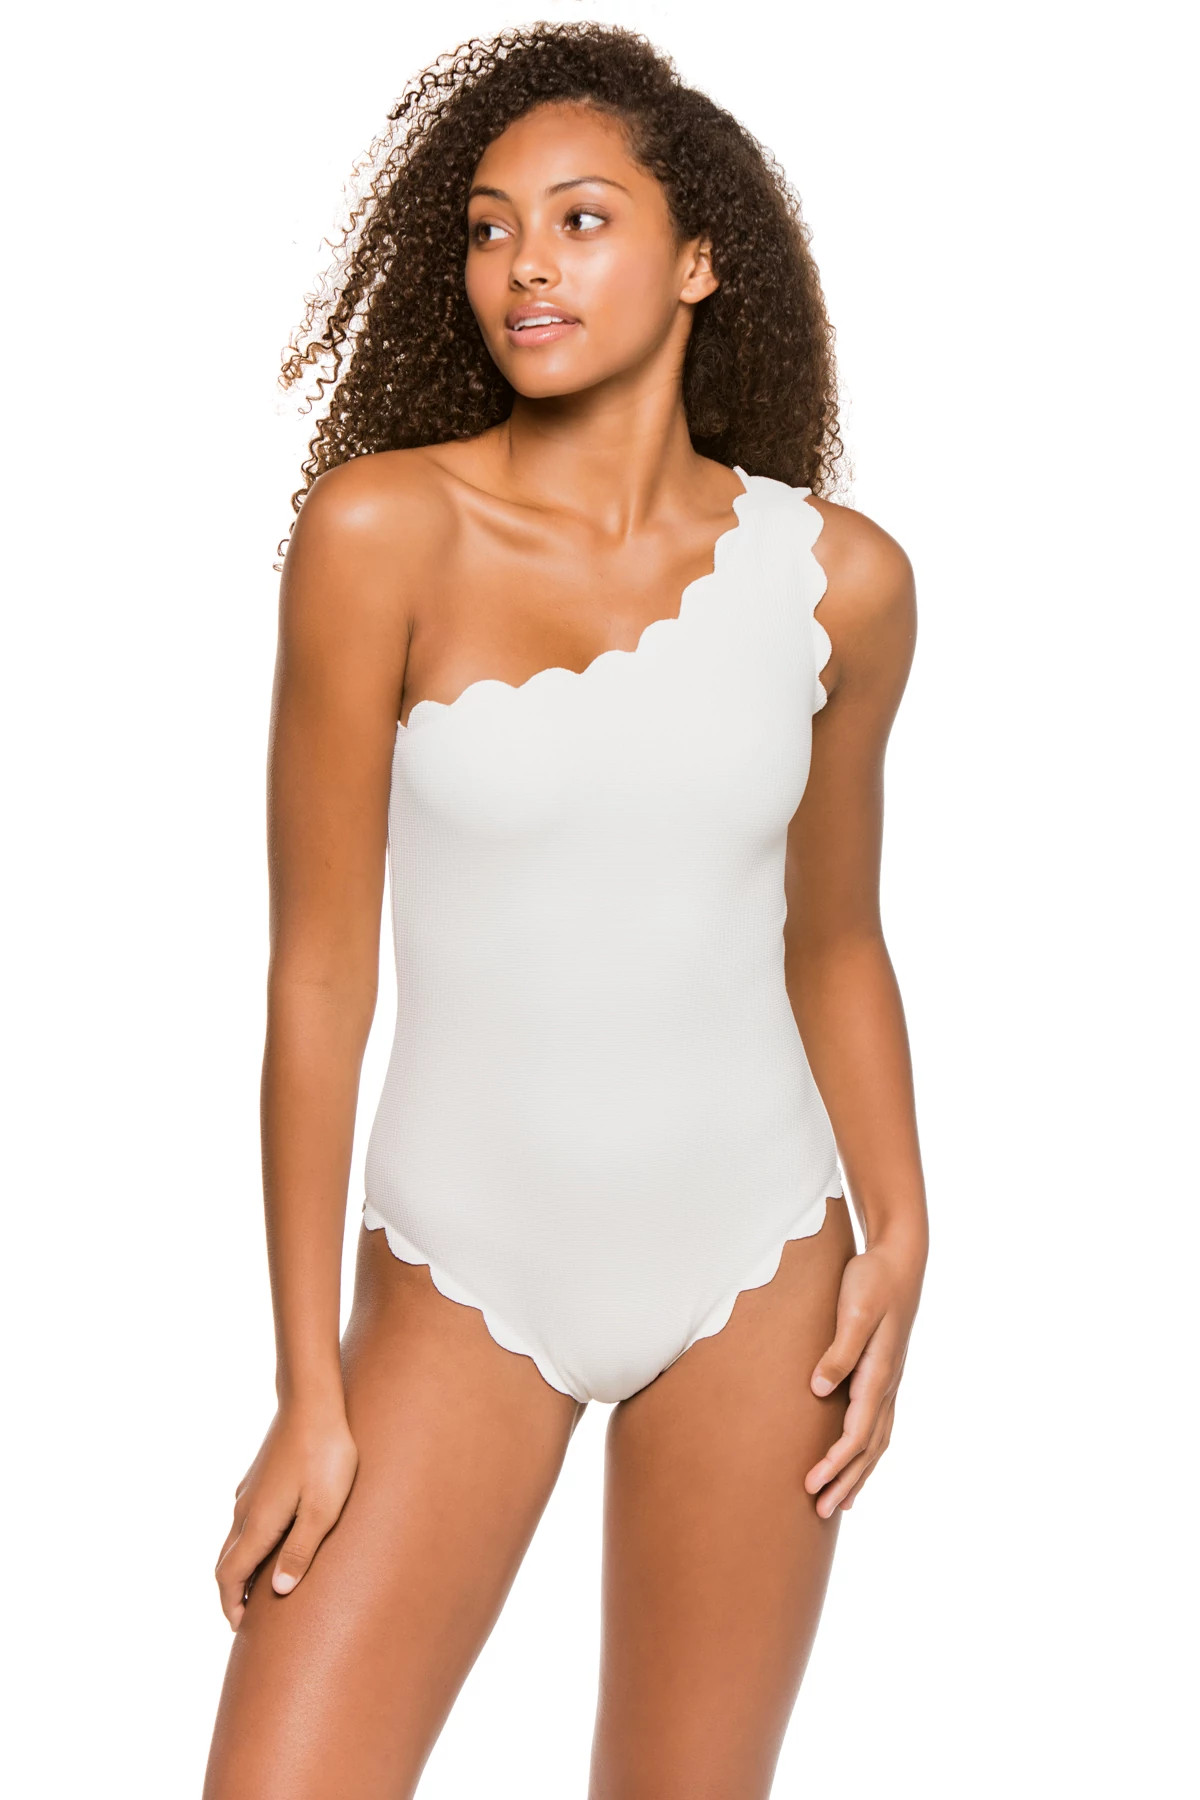 COCONUT Scallop Asymmetrical One Piece Swimsuit image number 1